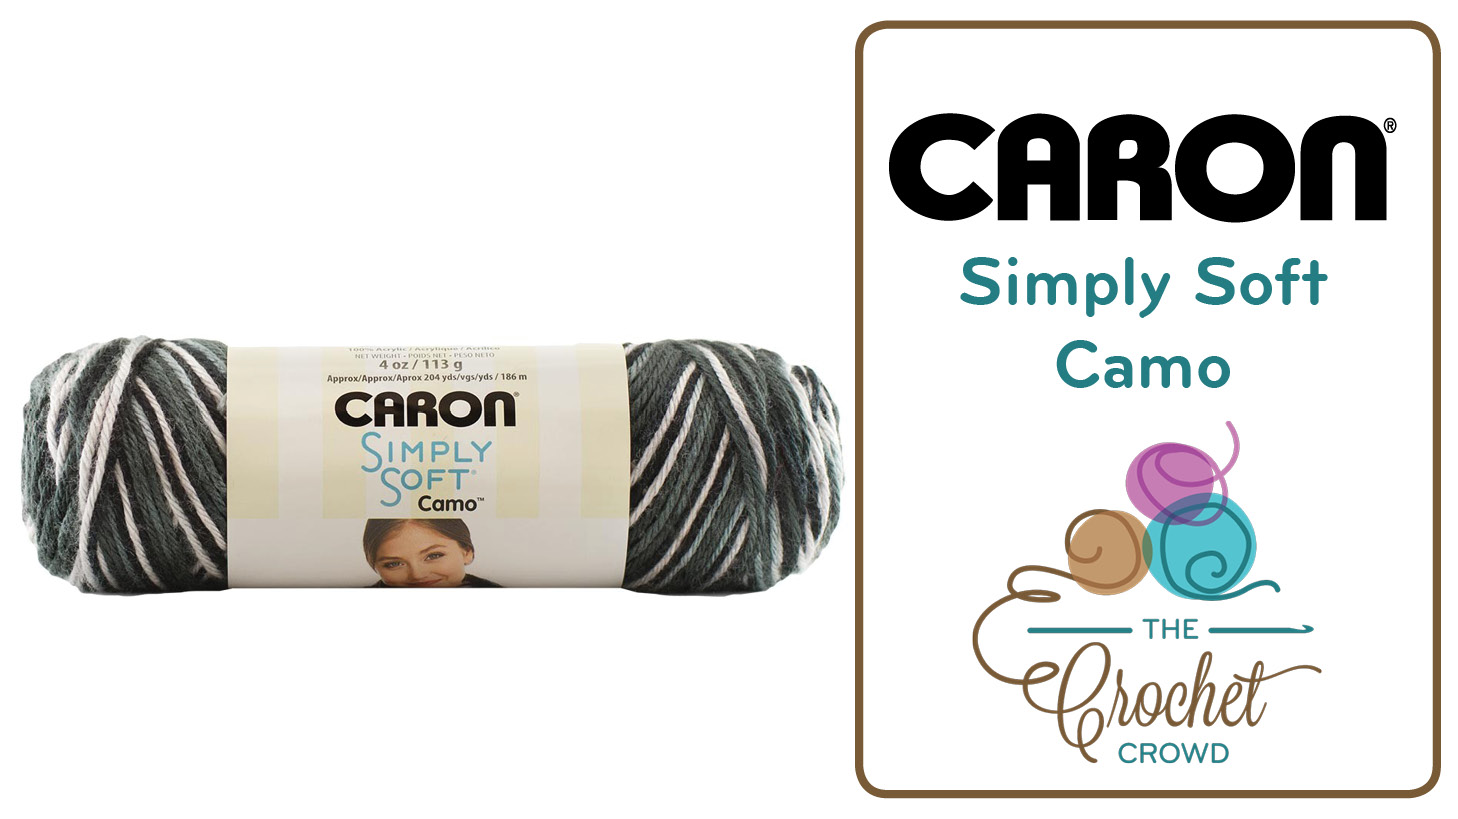 What To Do With Caron Simply Soft Camo Yarn